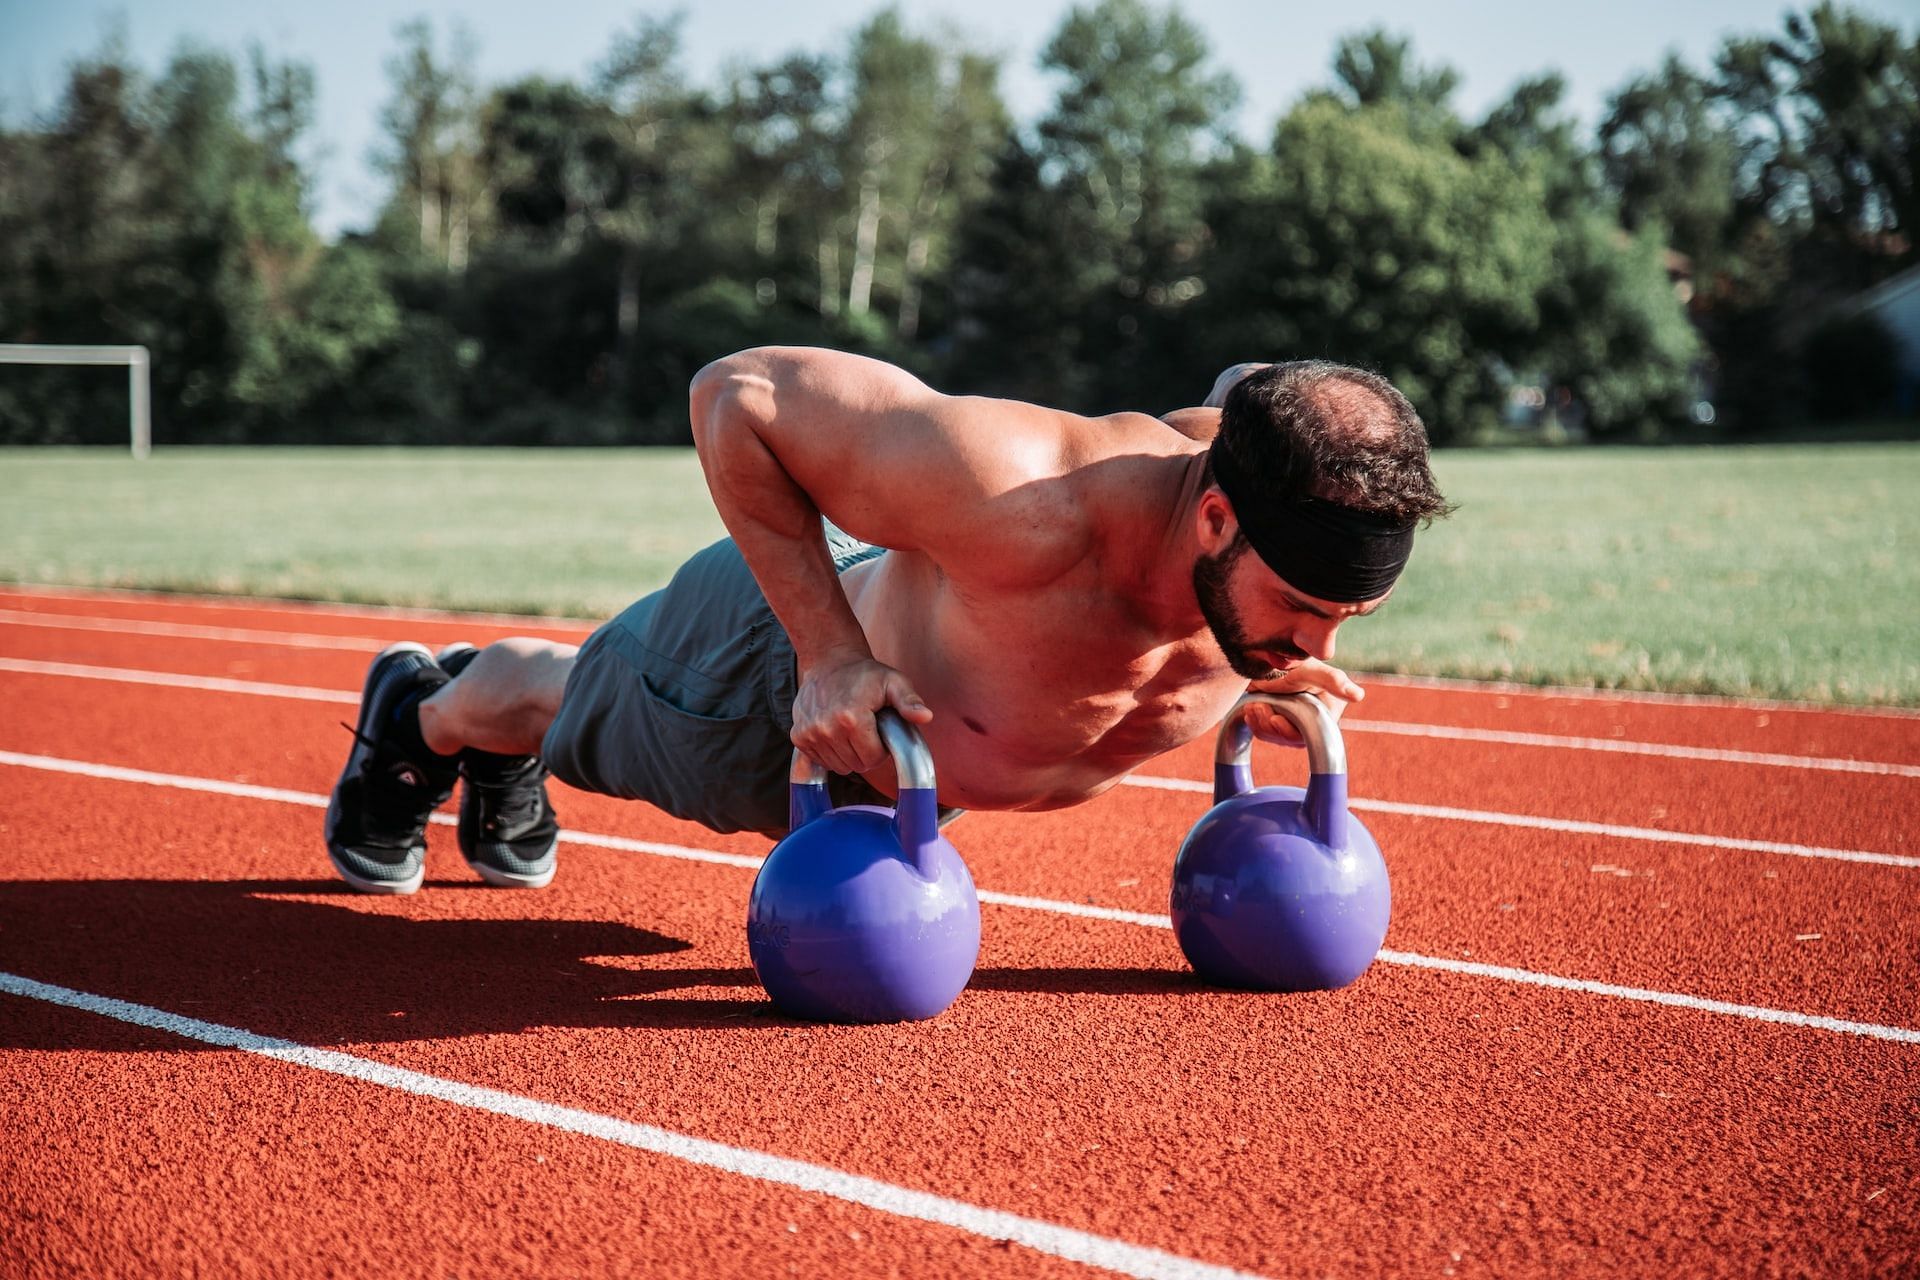 Kettlebell exercises to speed up your weight loss journey. (Photo via Alora Griffiths/Unsplash)